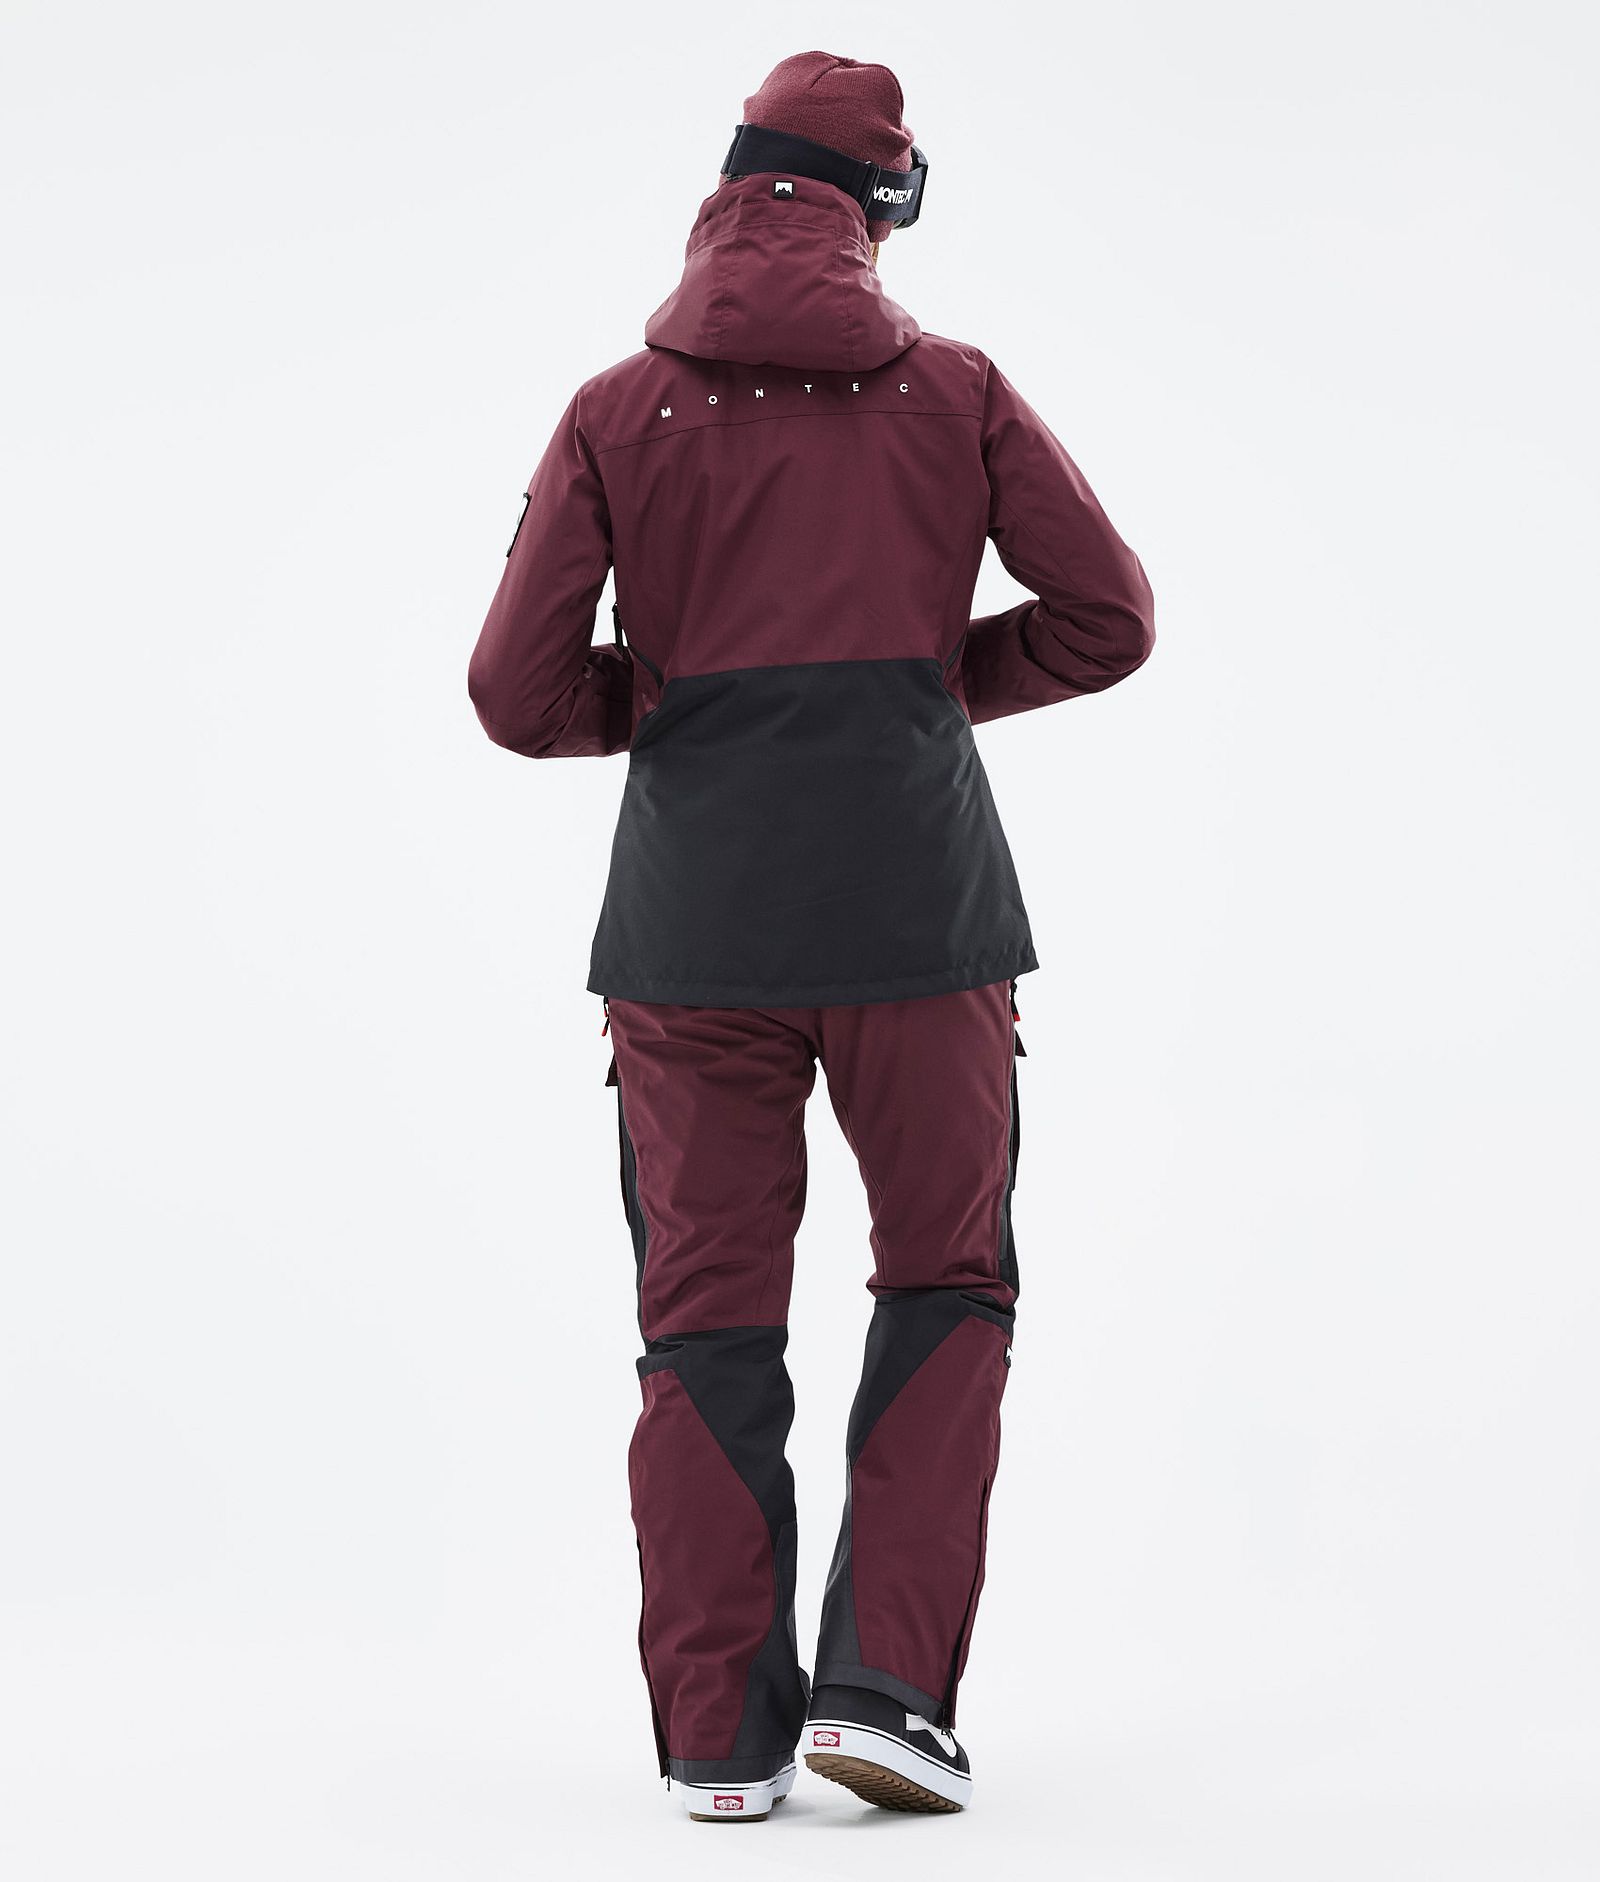 Moss W Outfit Snowboard Donna Burgundy/Black, Image 2 of 2